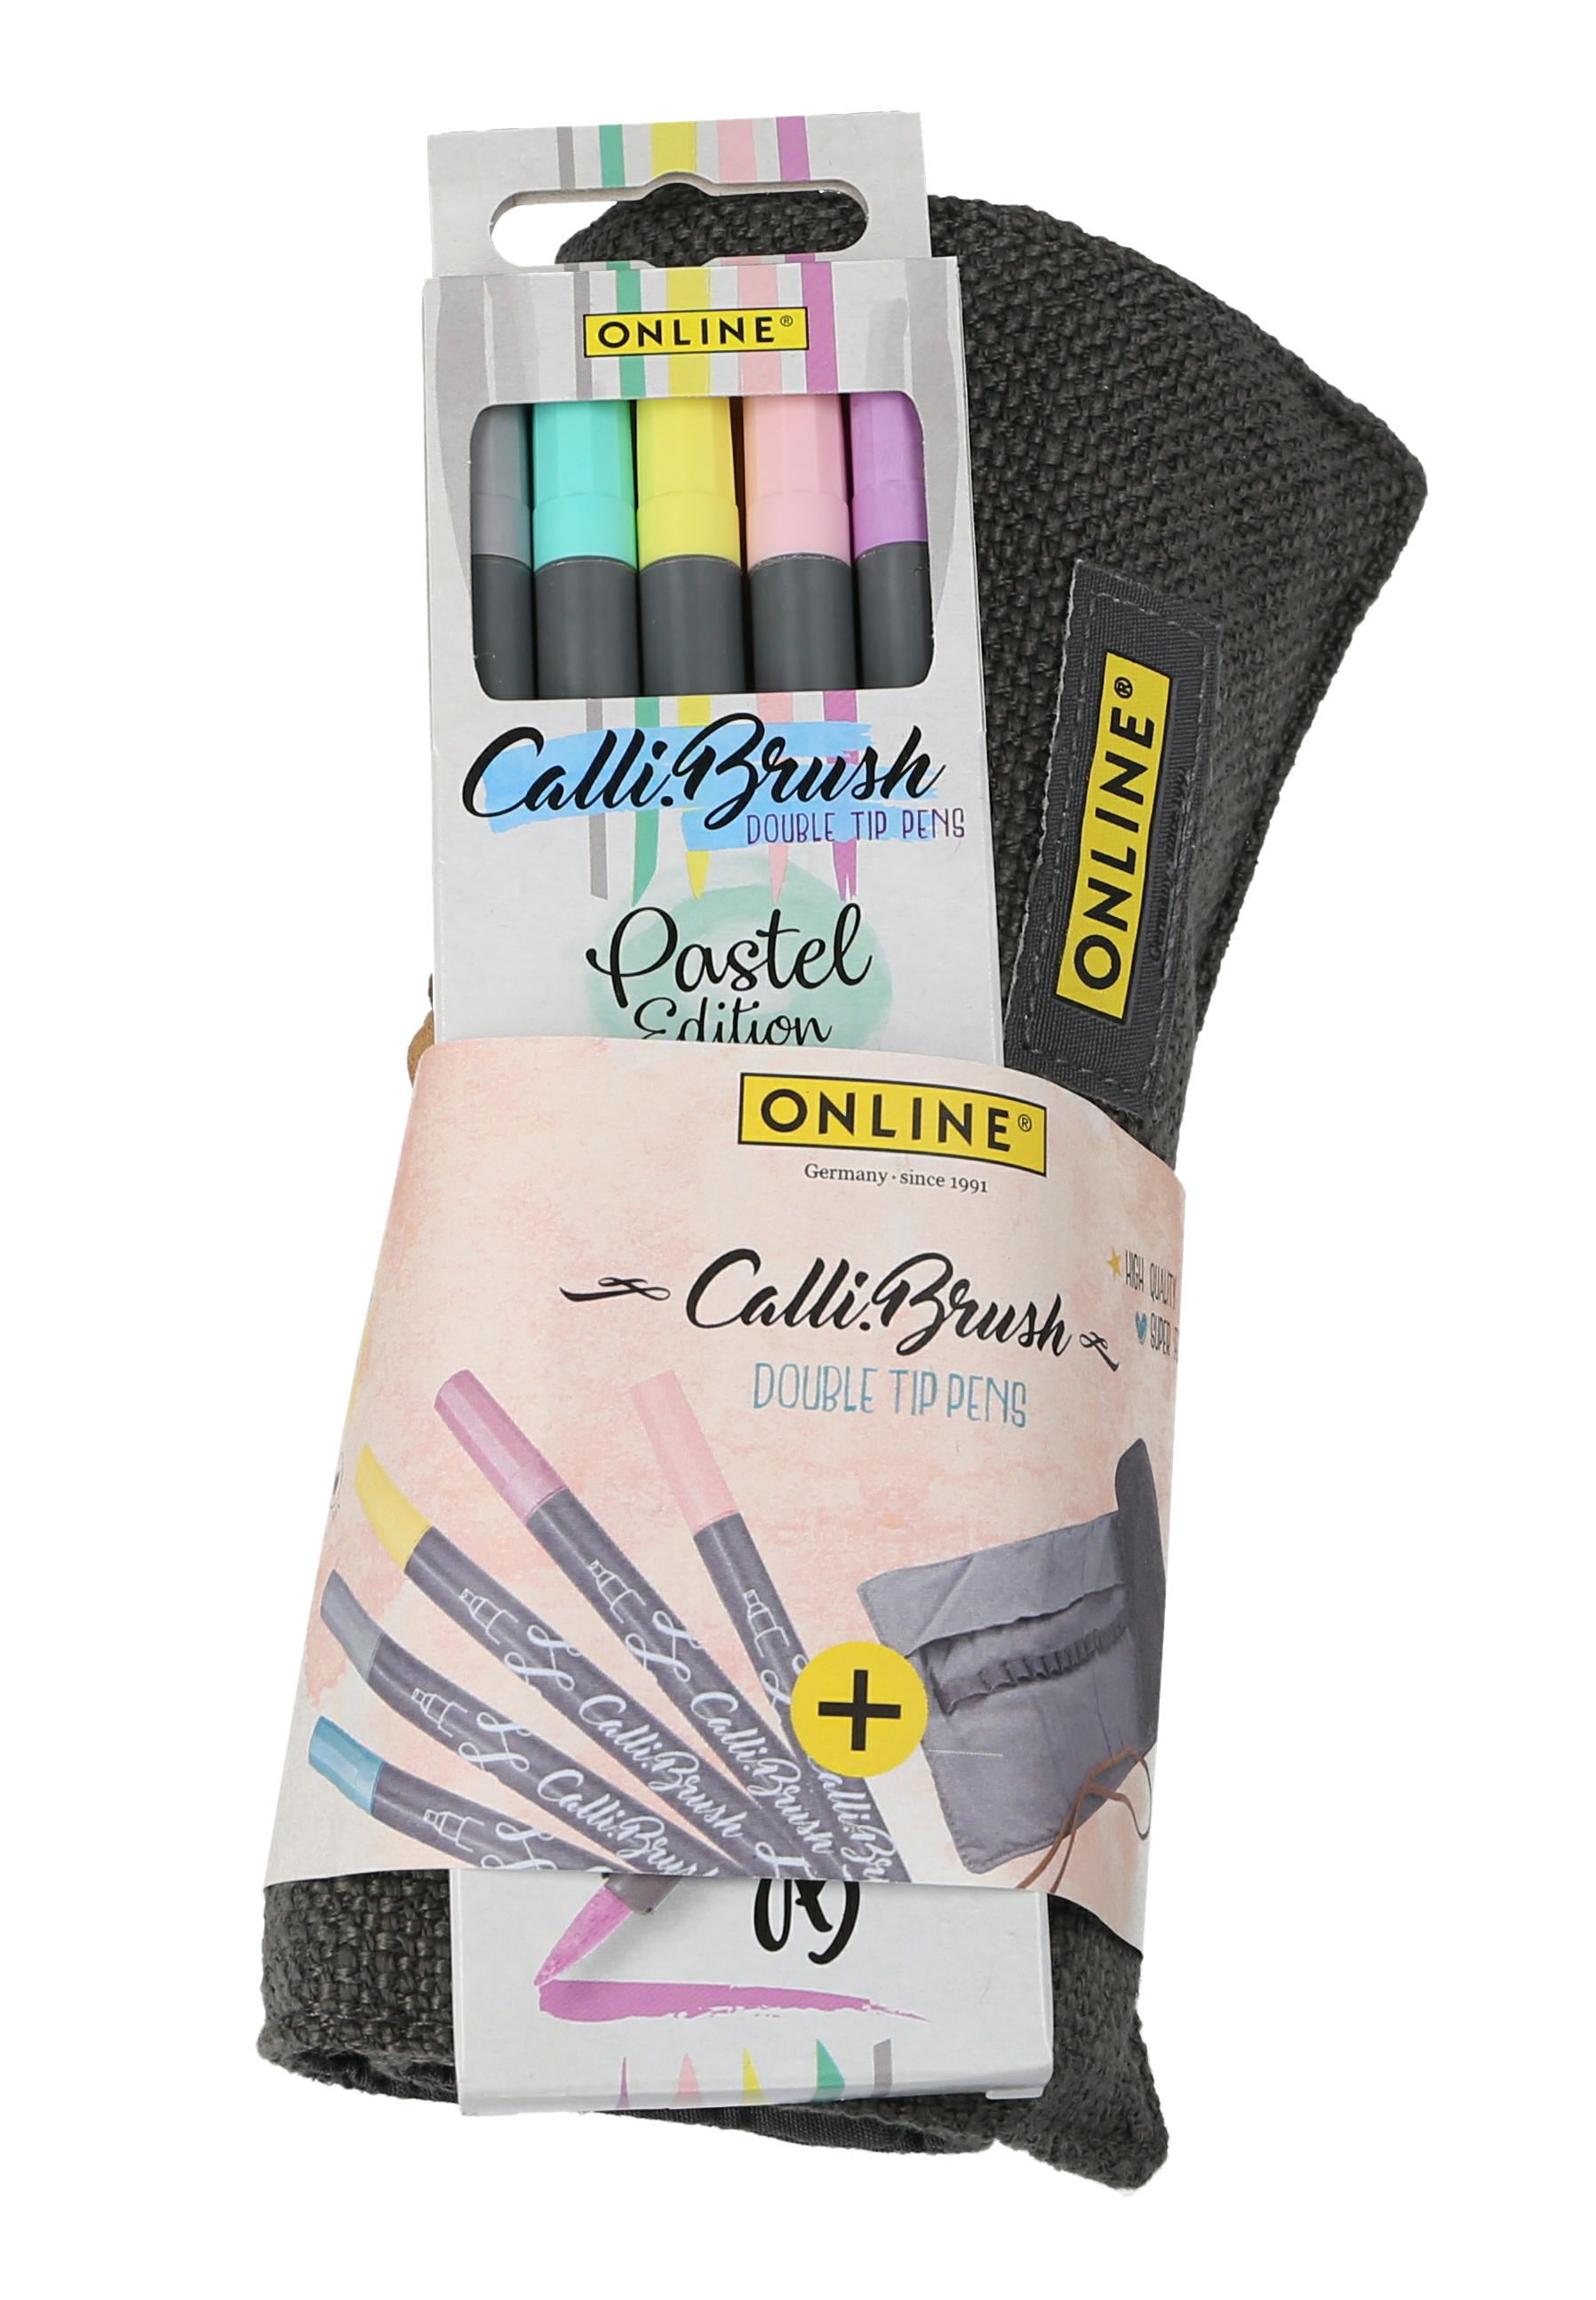 ONLINE Calli Brush Pens 19130 Double Tip in Roll Pouch